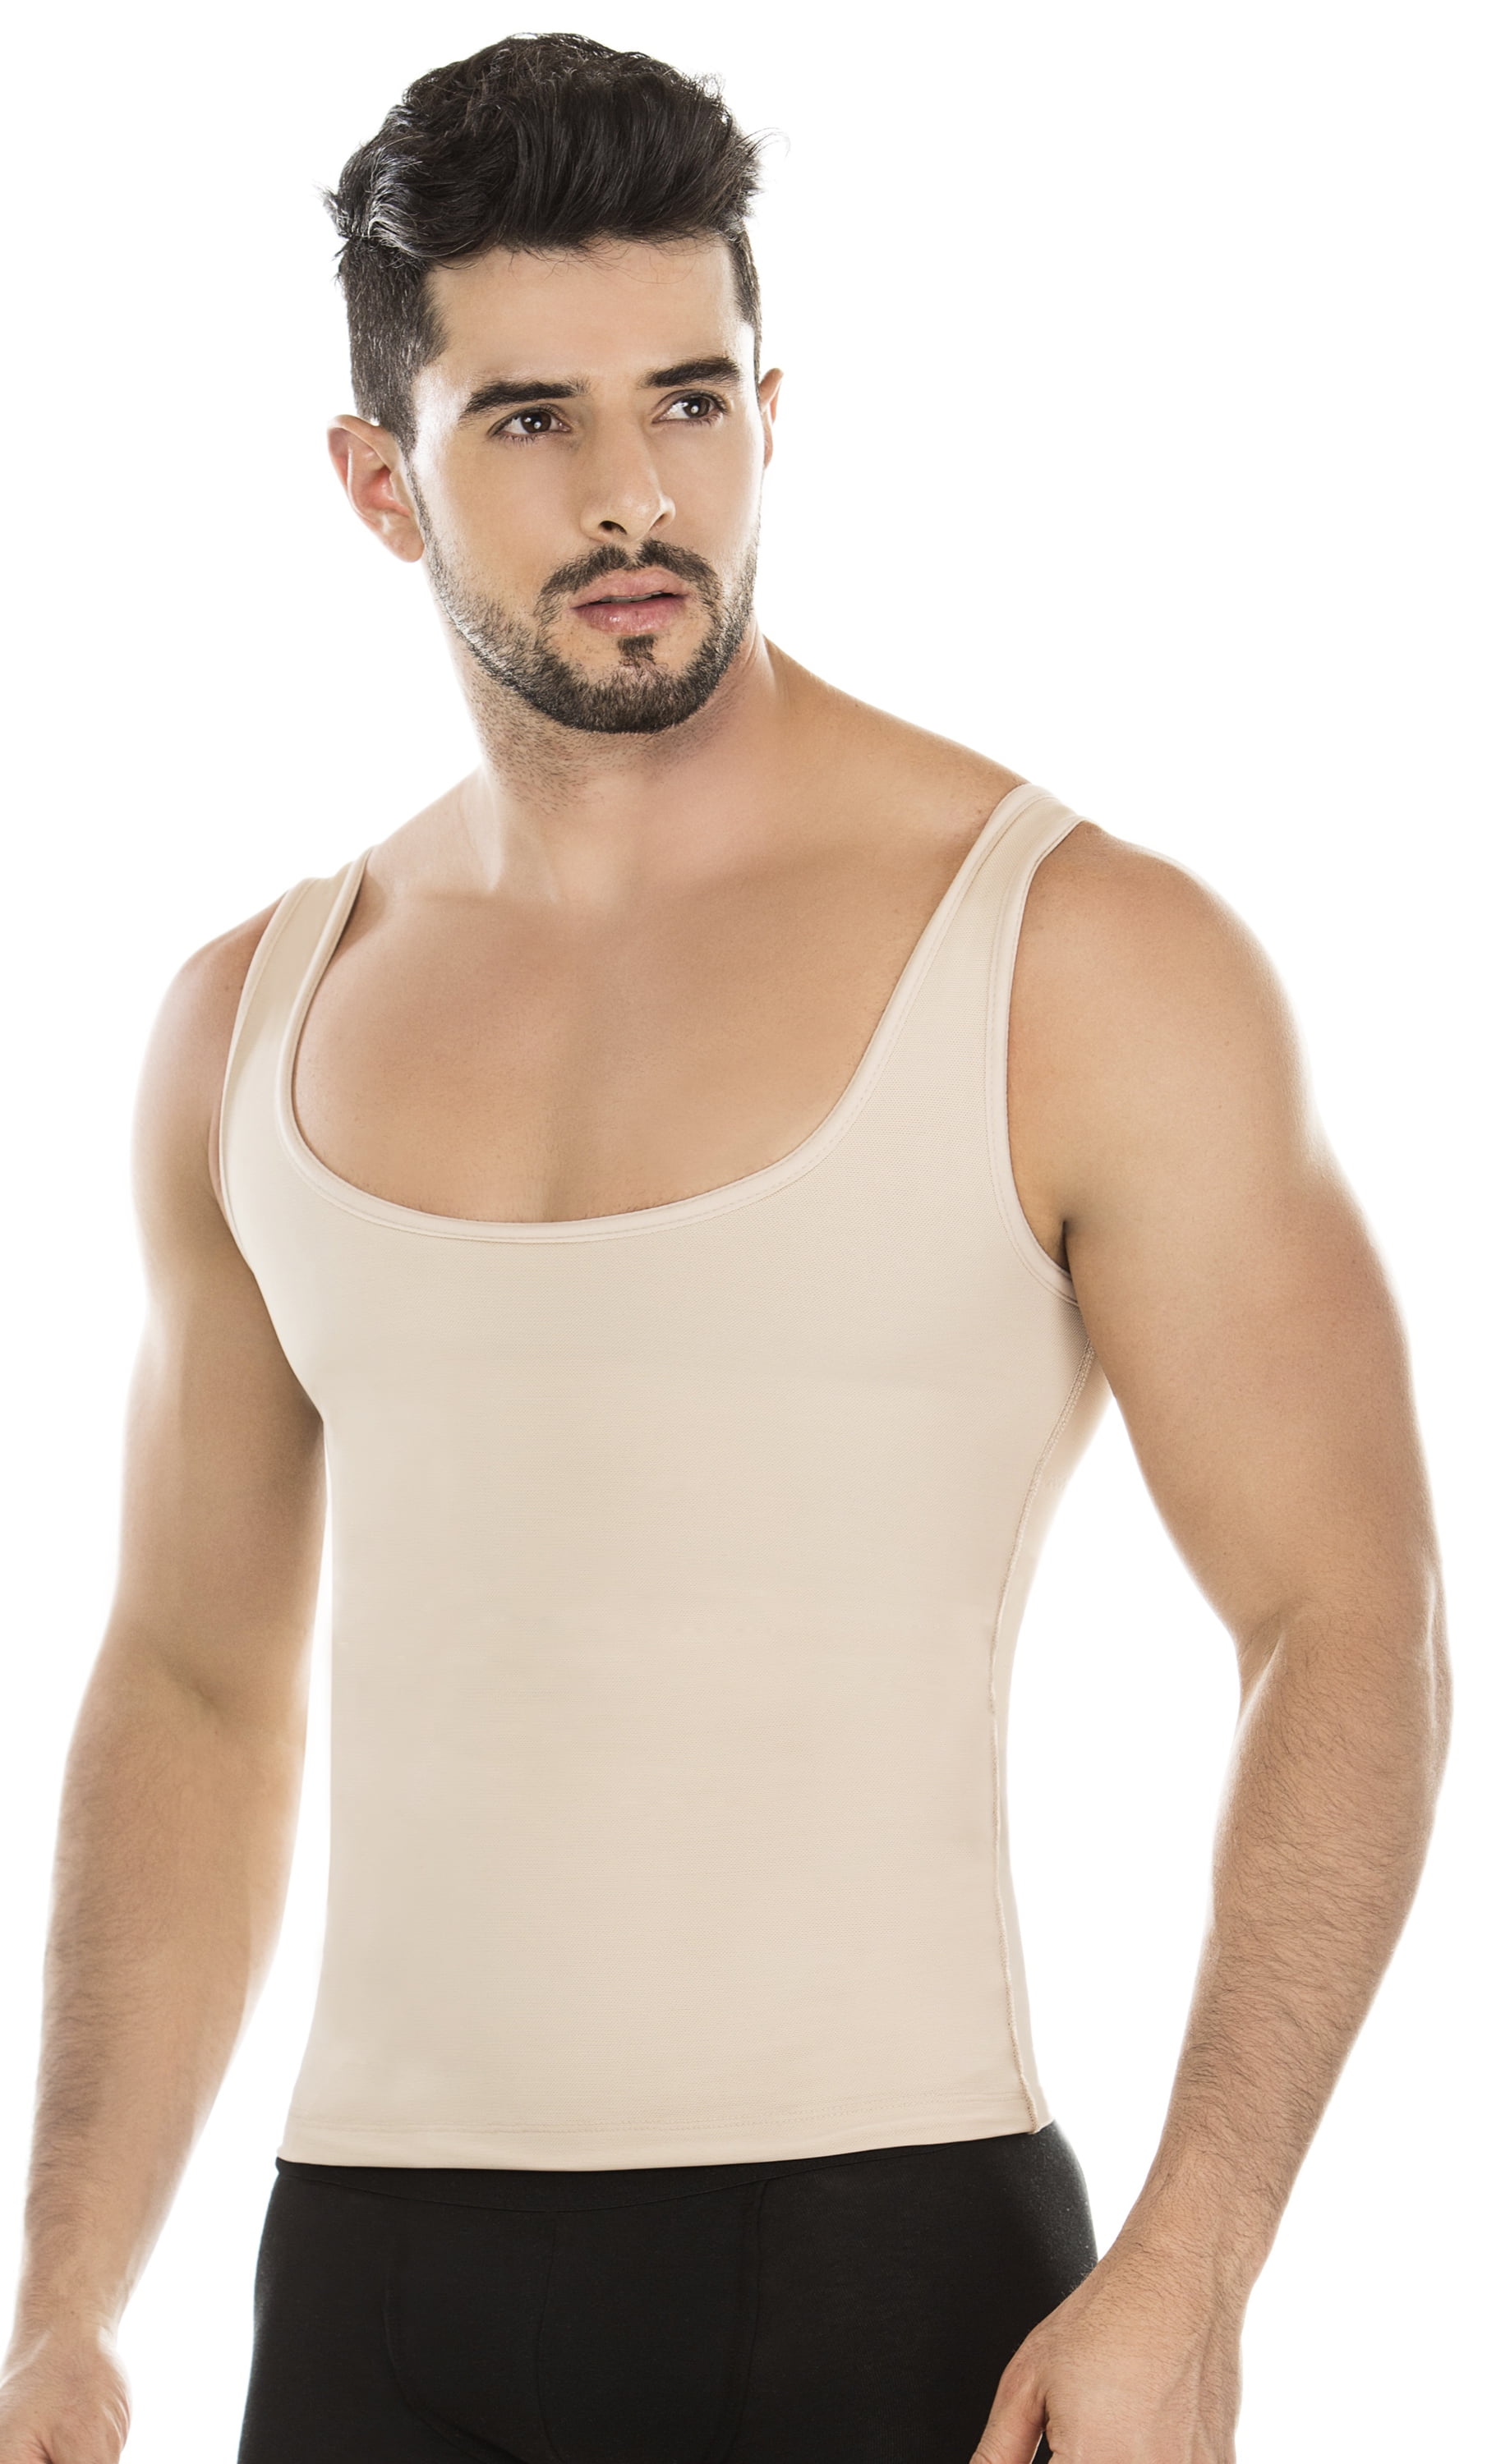 Underwear Shapewear Fajas Colombianas-Body Suit for men Compression Shirt  Seamless Firms up the Chest Back Pain Relief Abdomen Trimmer Corrects  Posture Fajas Colombianas para hombres reductoras y moldea 